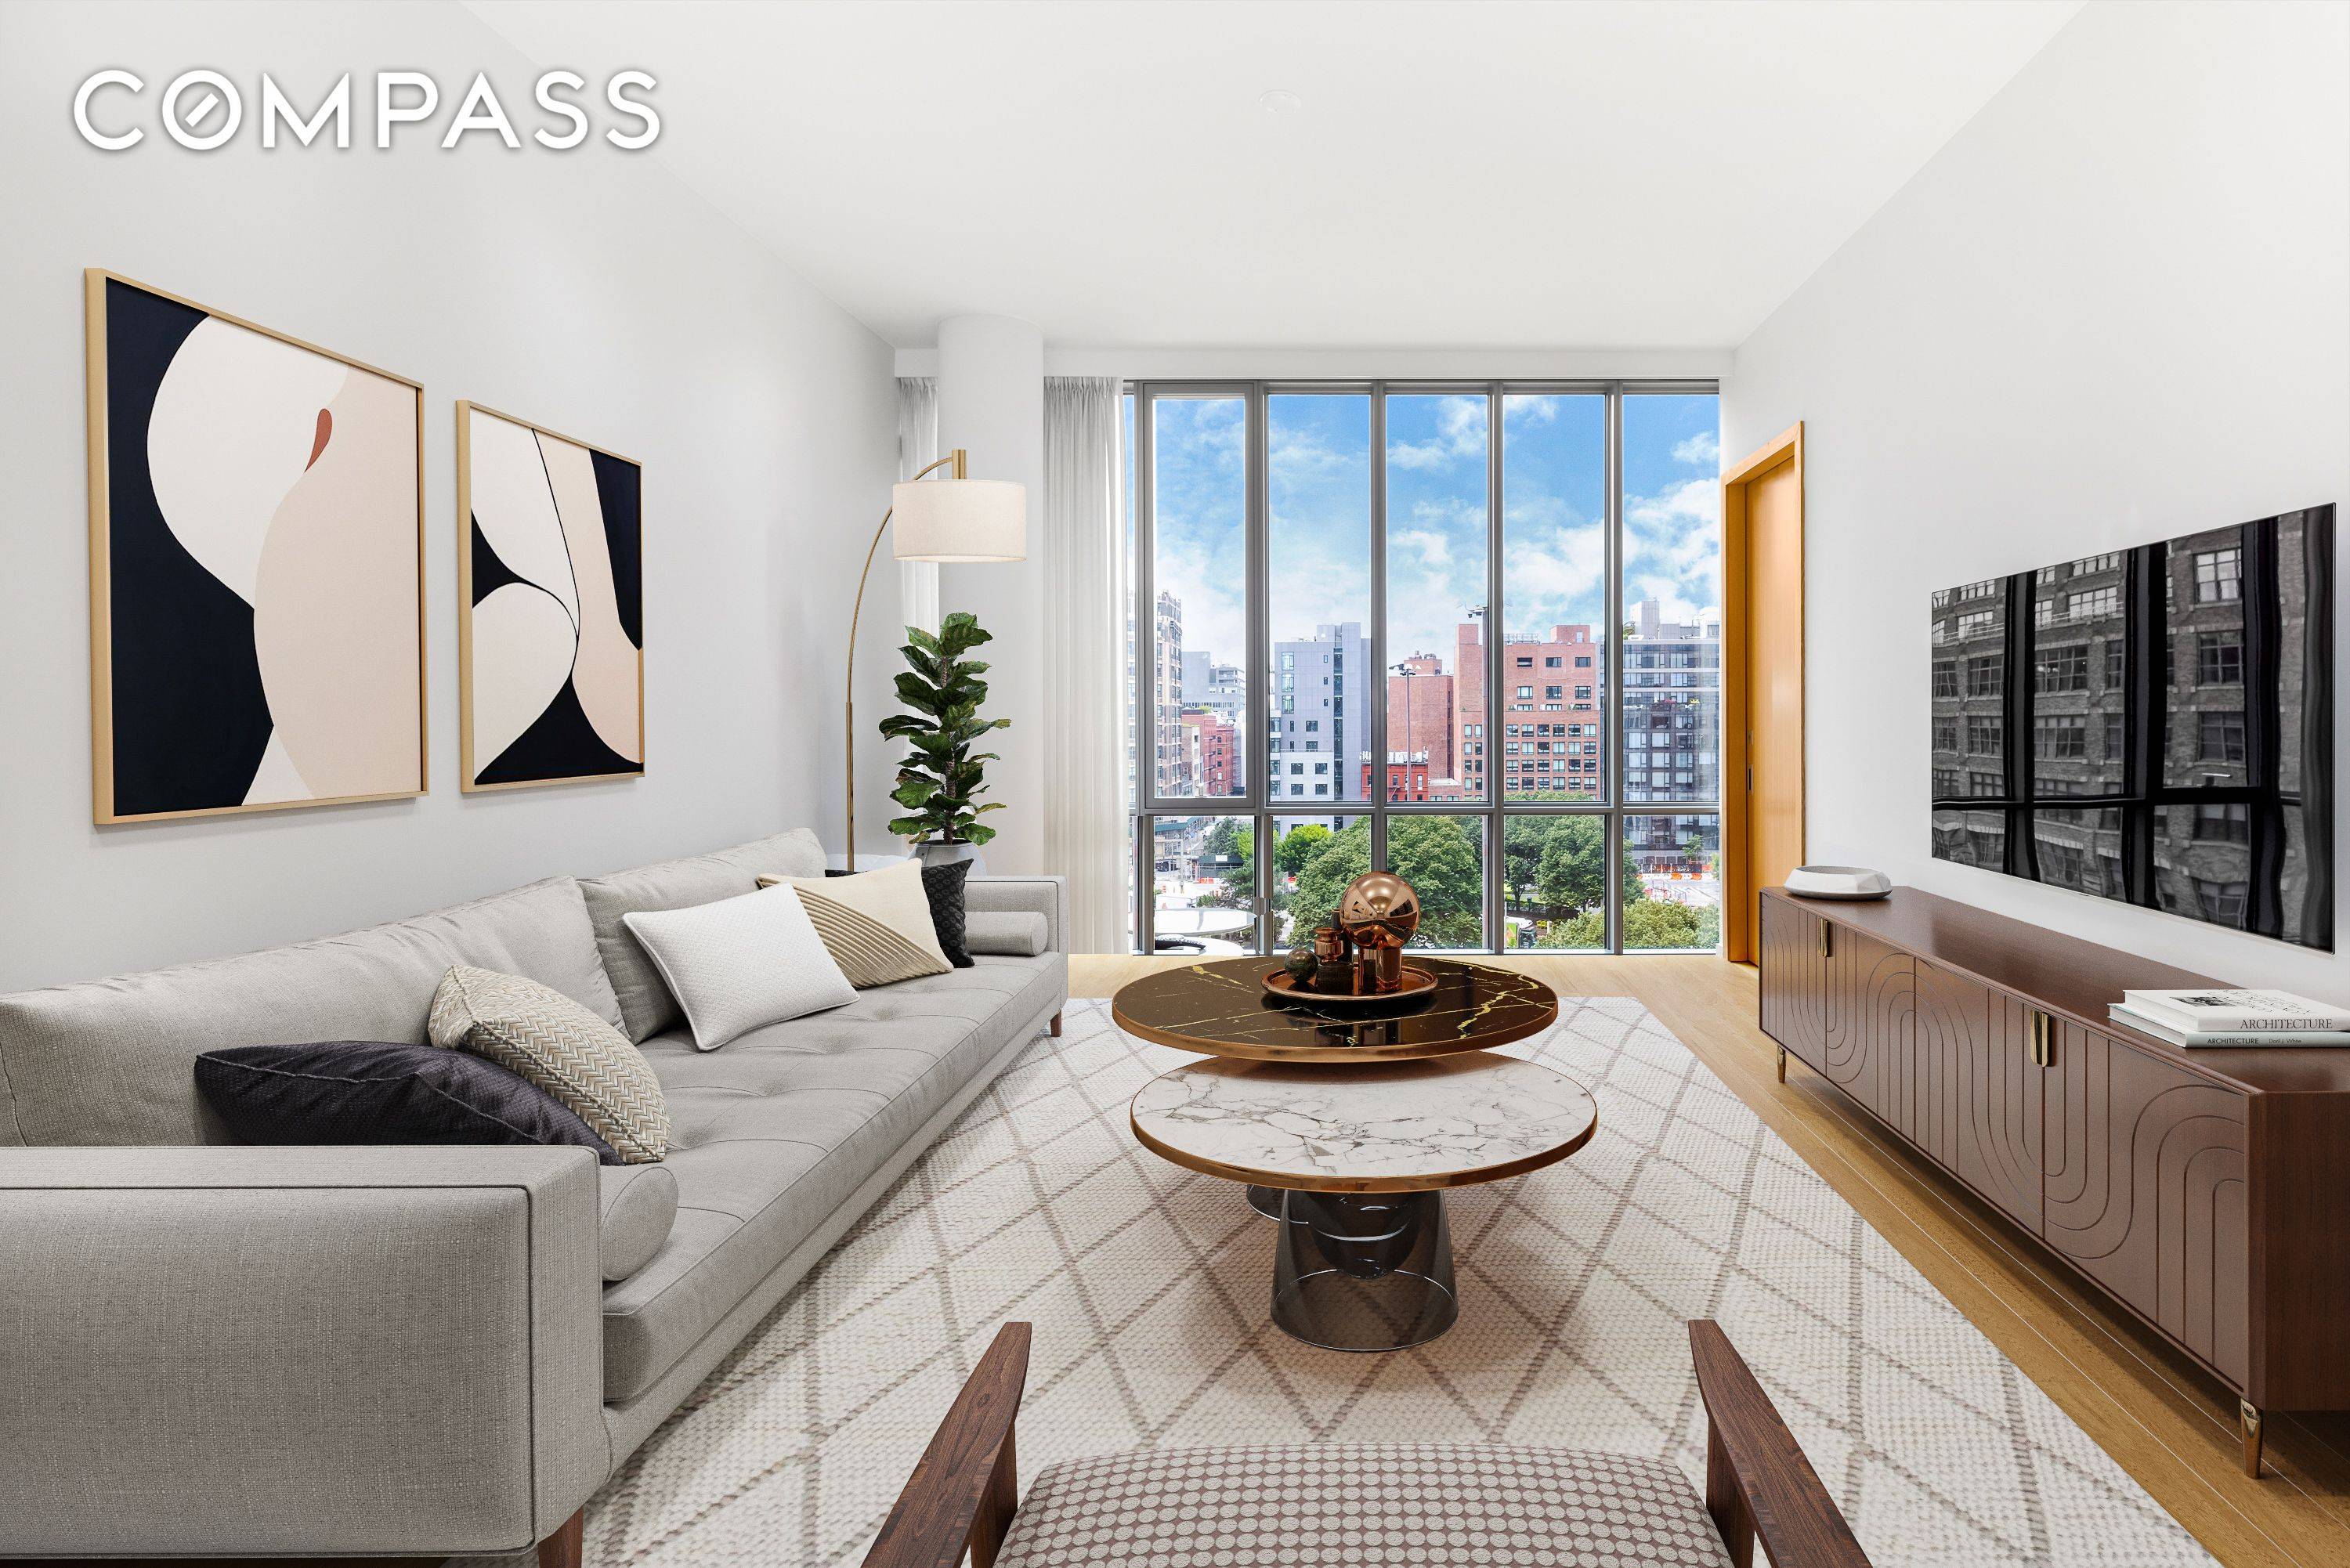 TRULY A HOME TO ENVY, THIS HIGH FLOOR, 990 SQUARE FOOT 1 BEDROOM, 1.